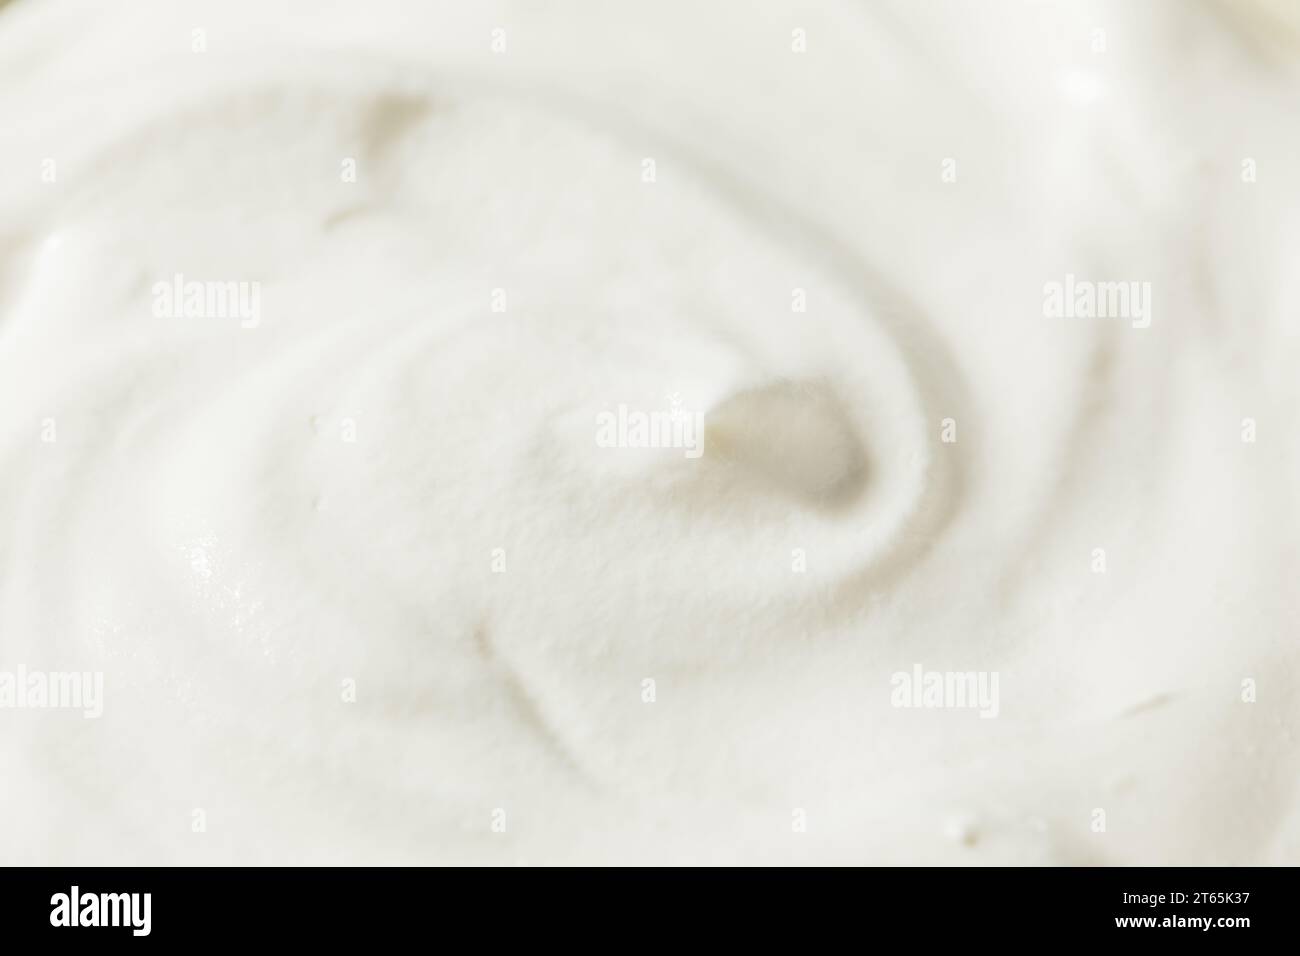 Sweet White Whipped Cream Dessert in a Bowl Stock Photo